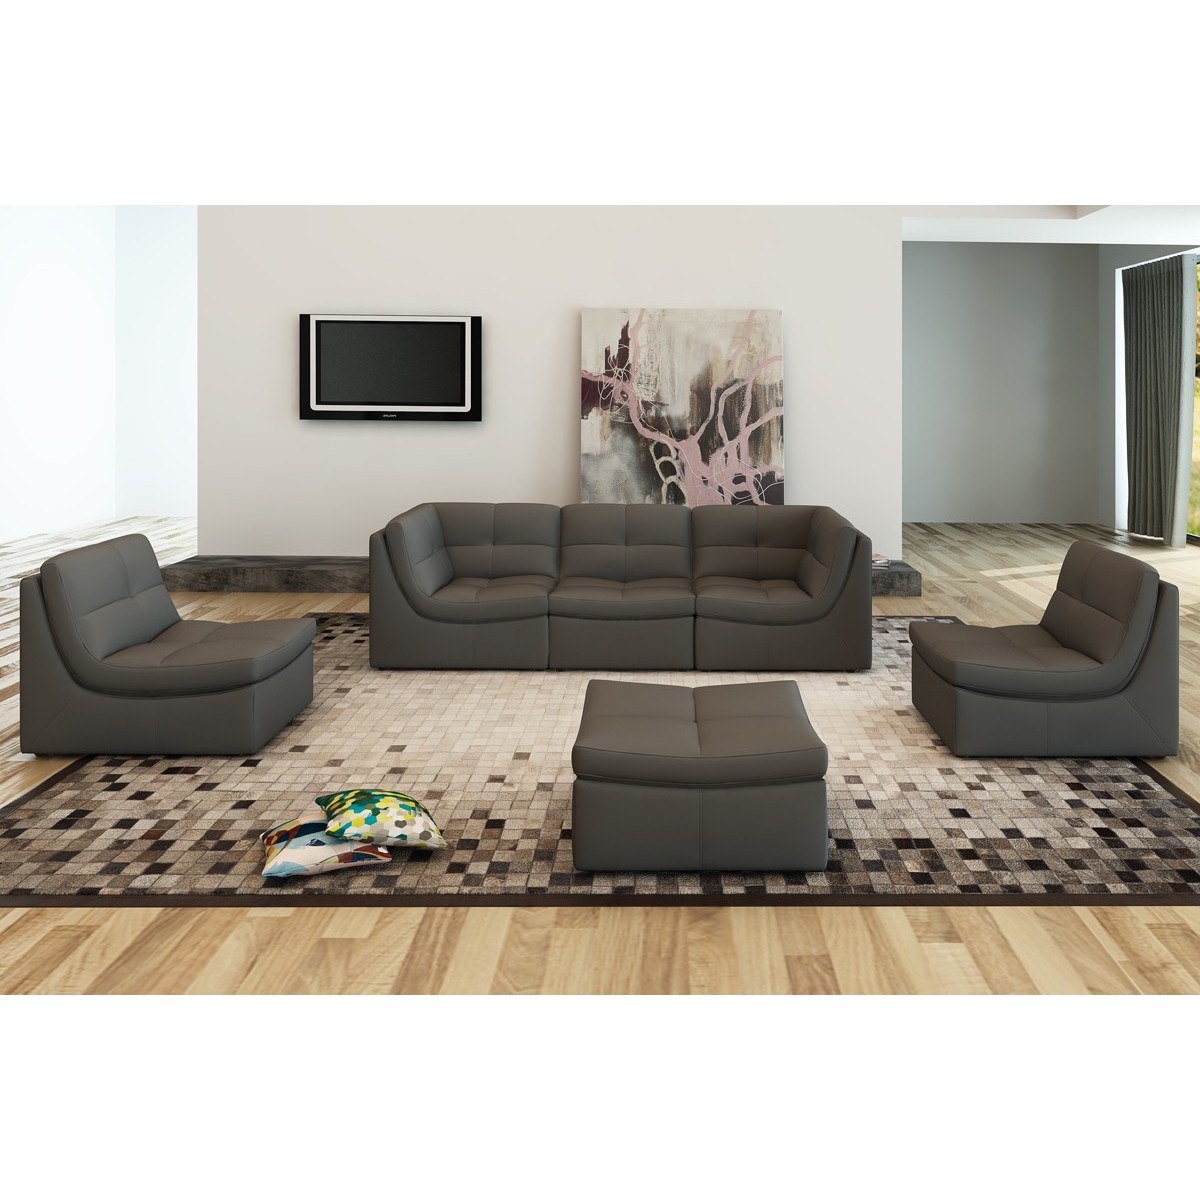 Bedroom La Furniture, The Cloud Leather Sectional